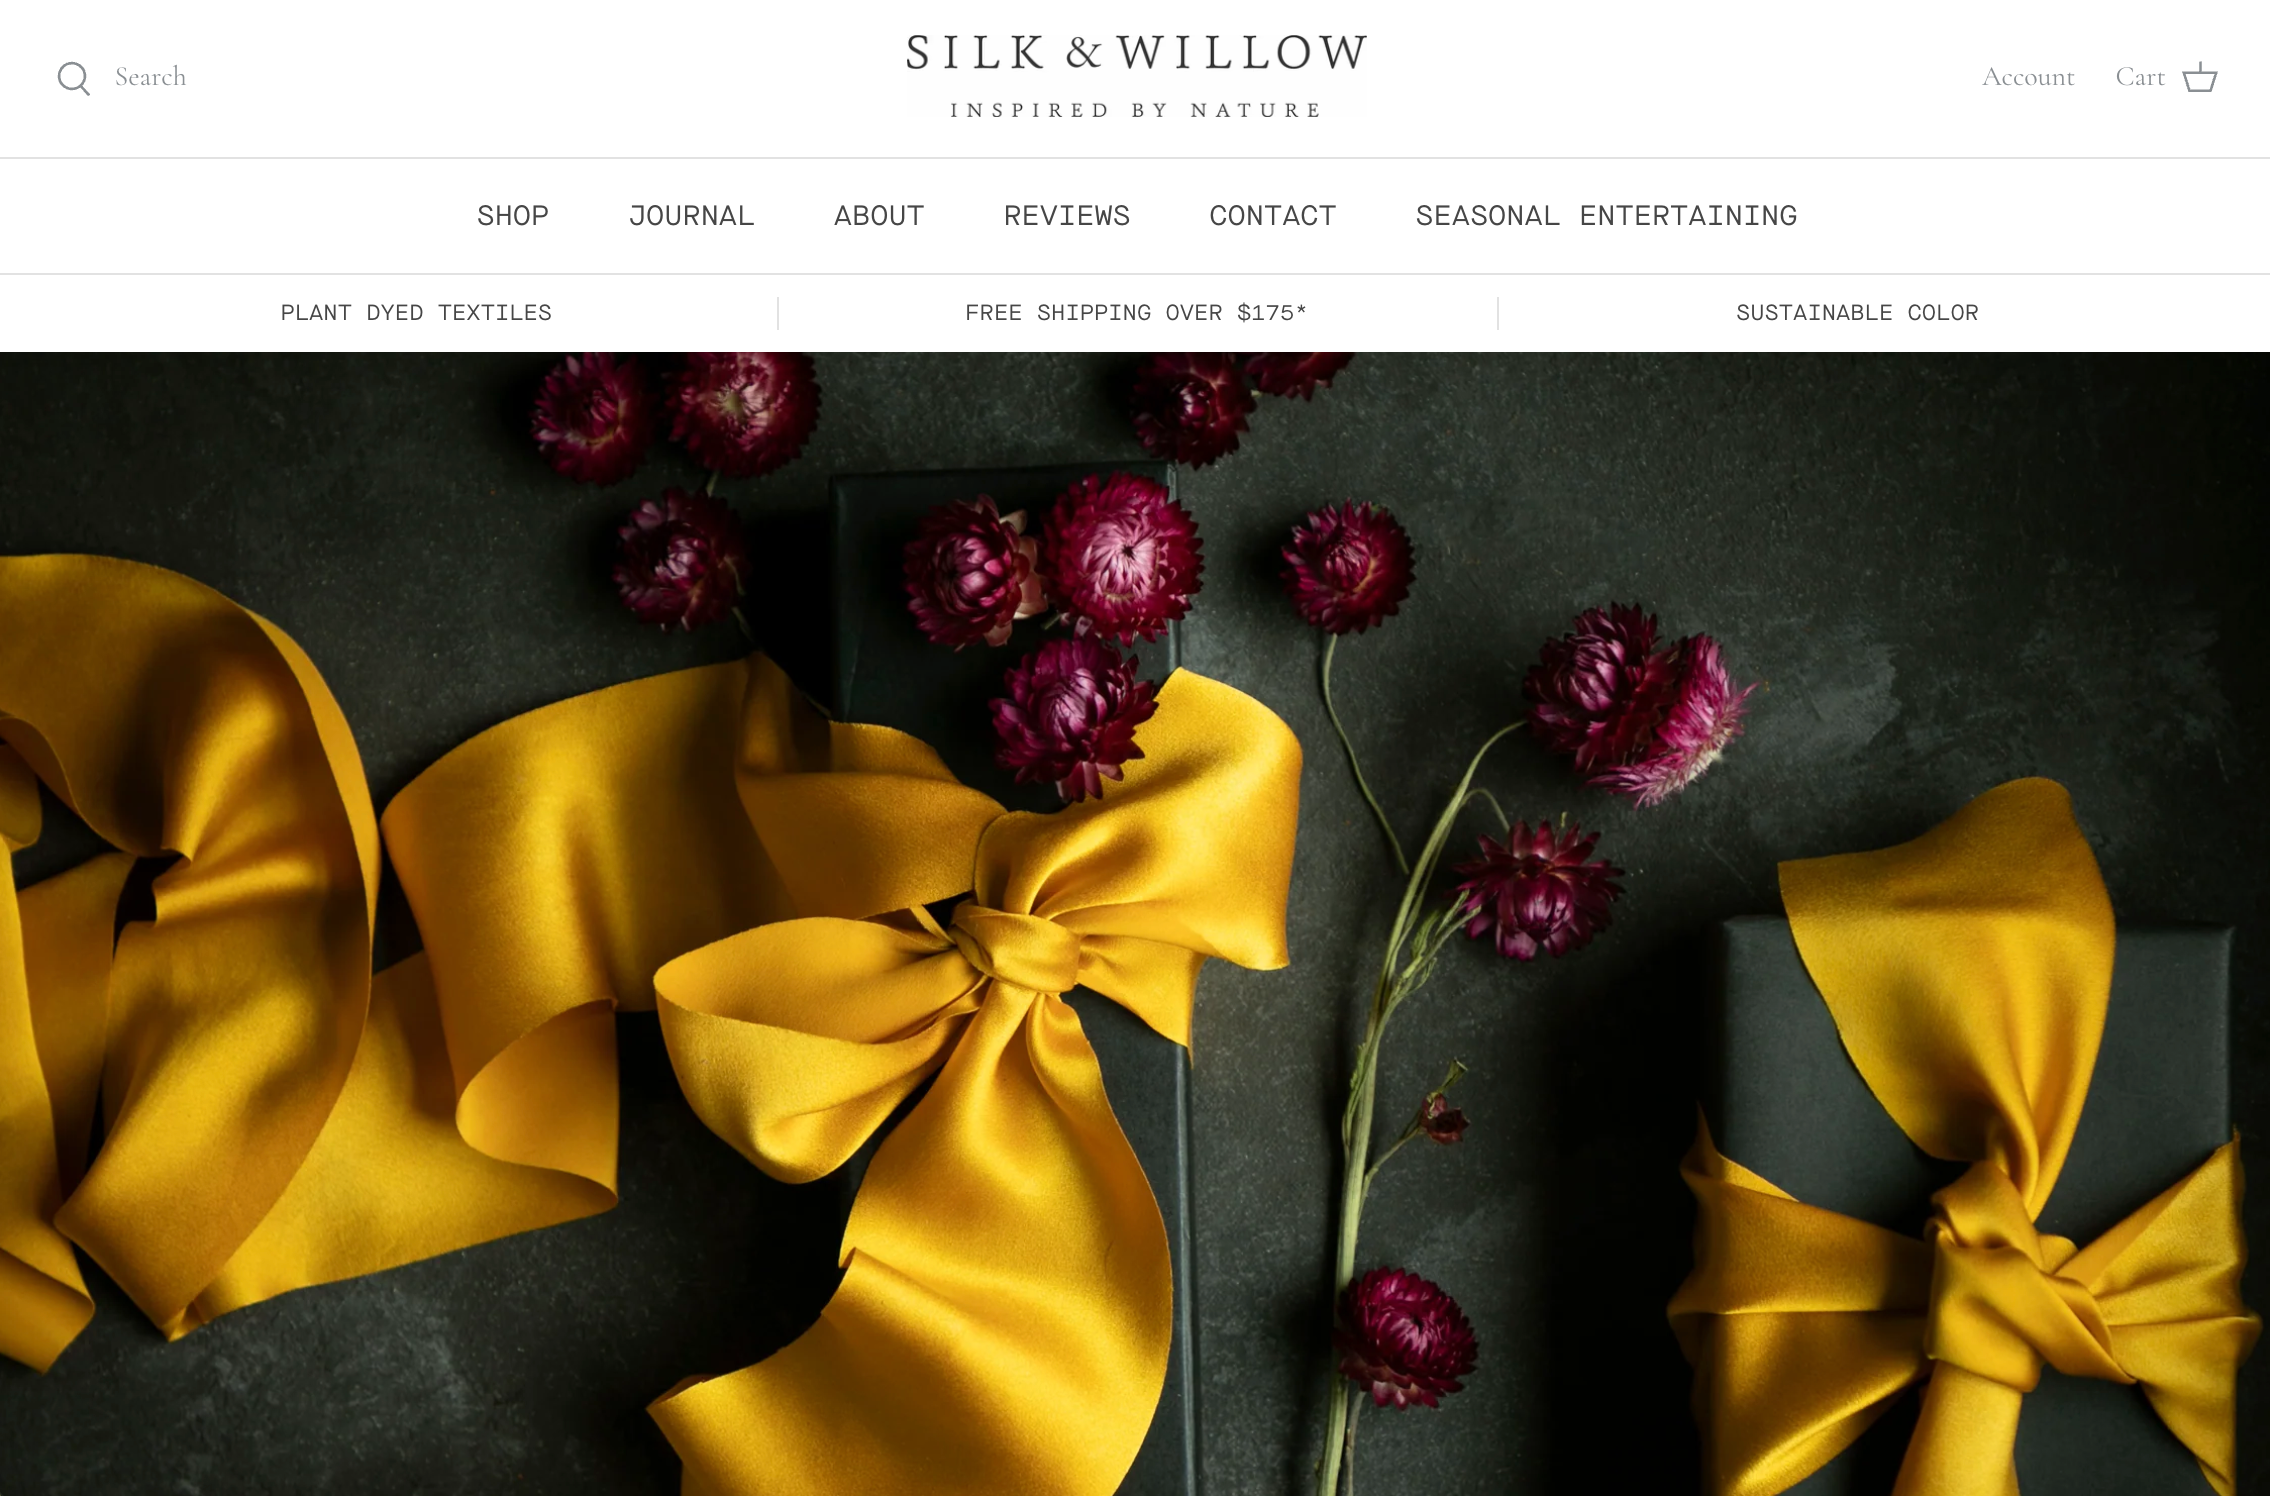 Homepage on Silk & Willow's ecommerce website